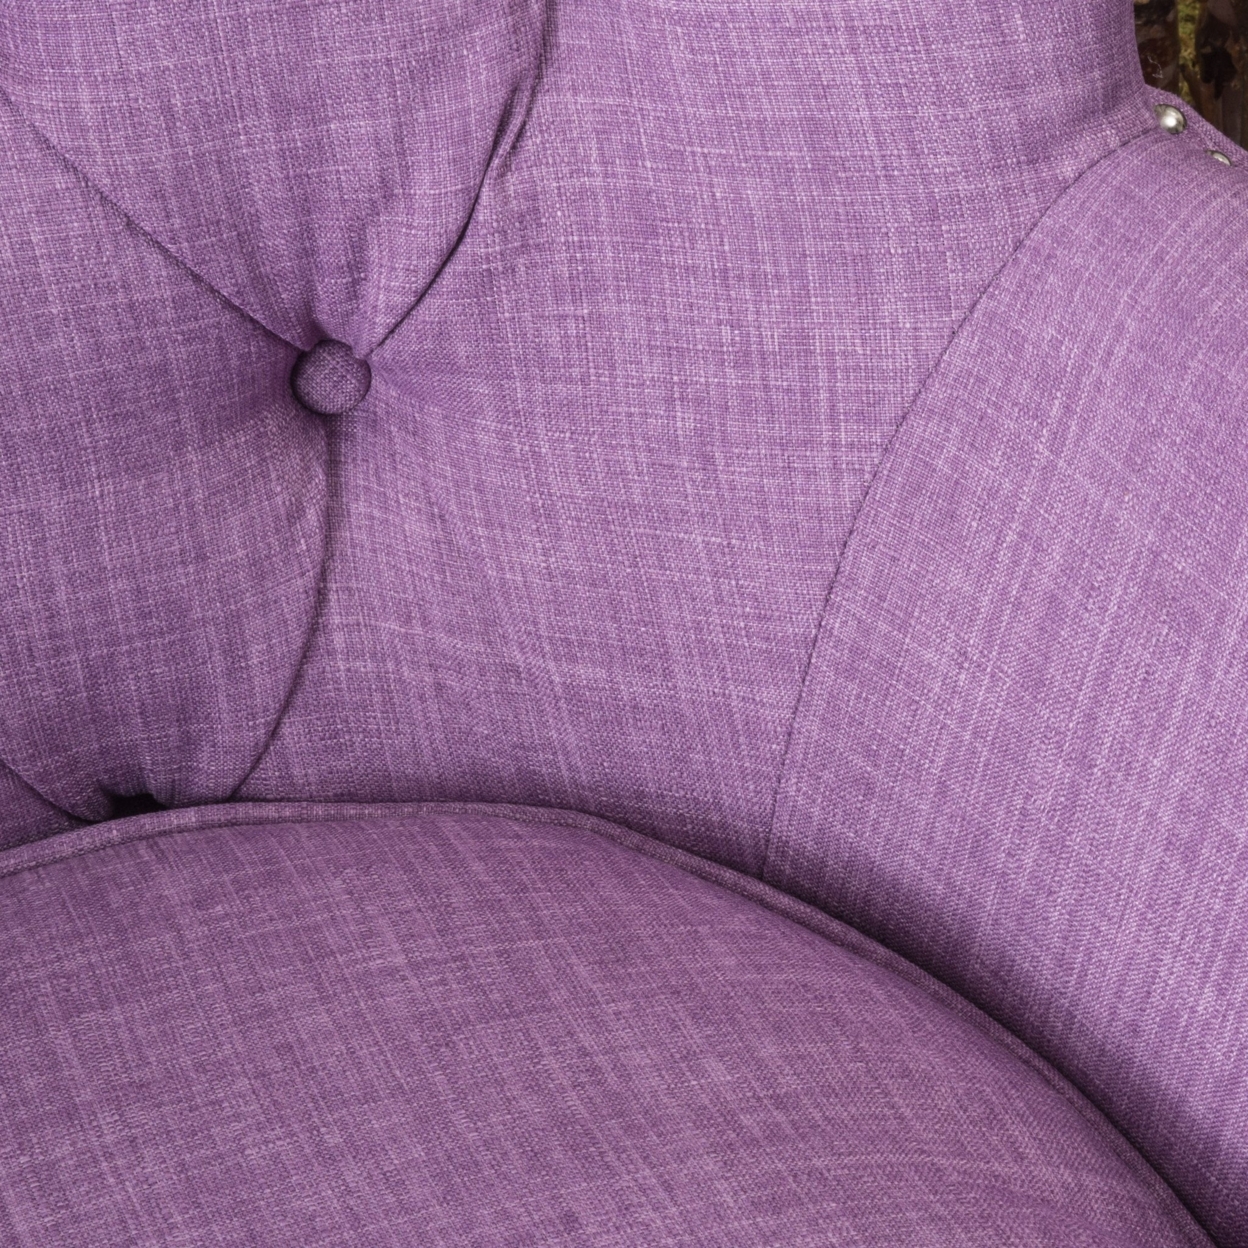 Laxford Upholstered Club Chair - Purple, Fabric